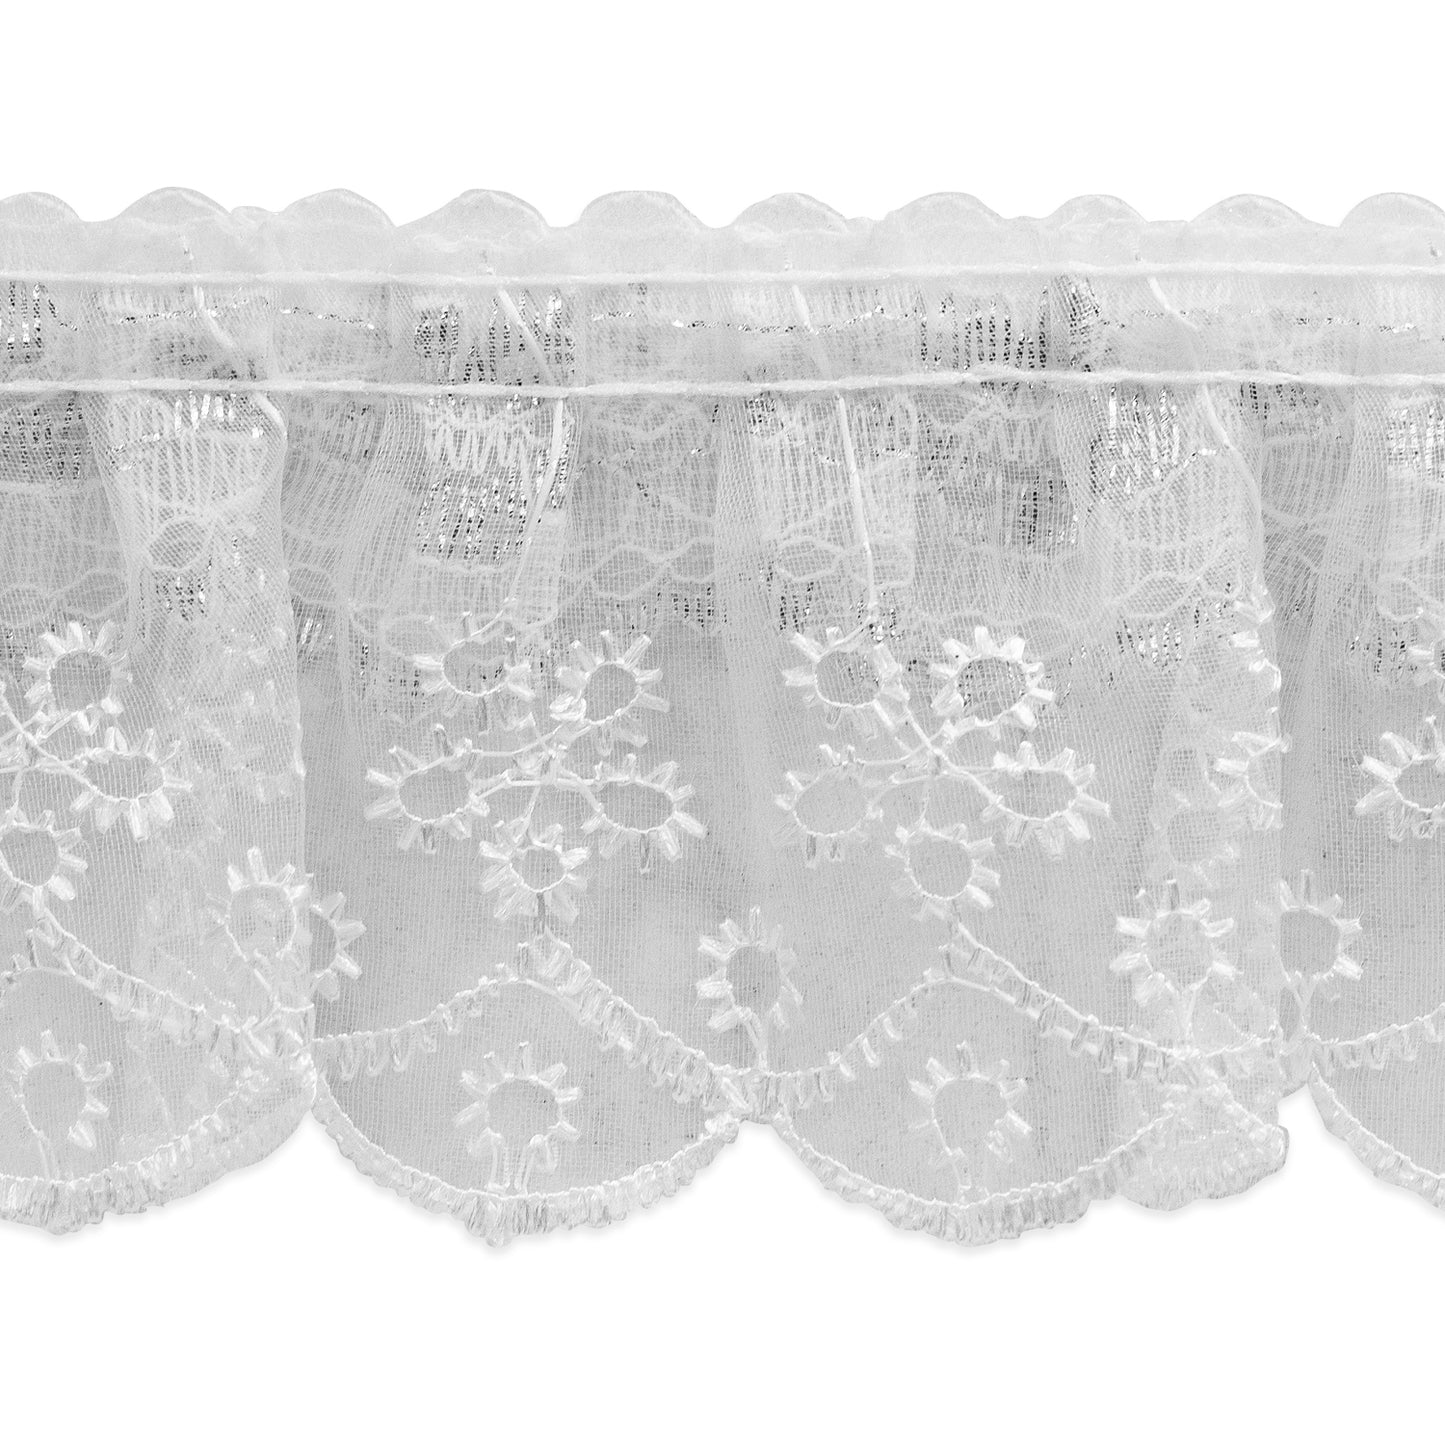 Belen Sequin Lace Trim (Sold by the Yard)